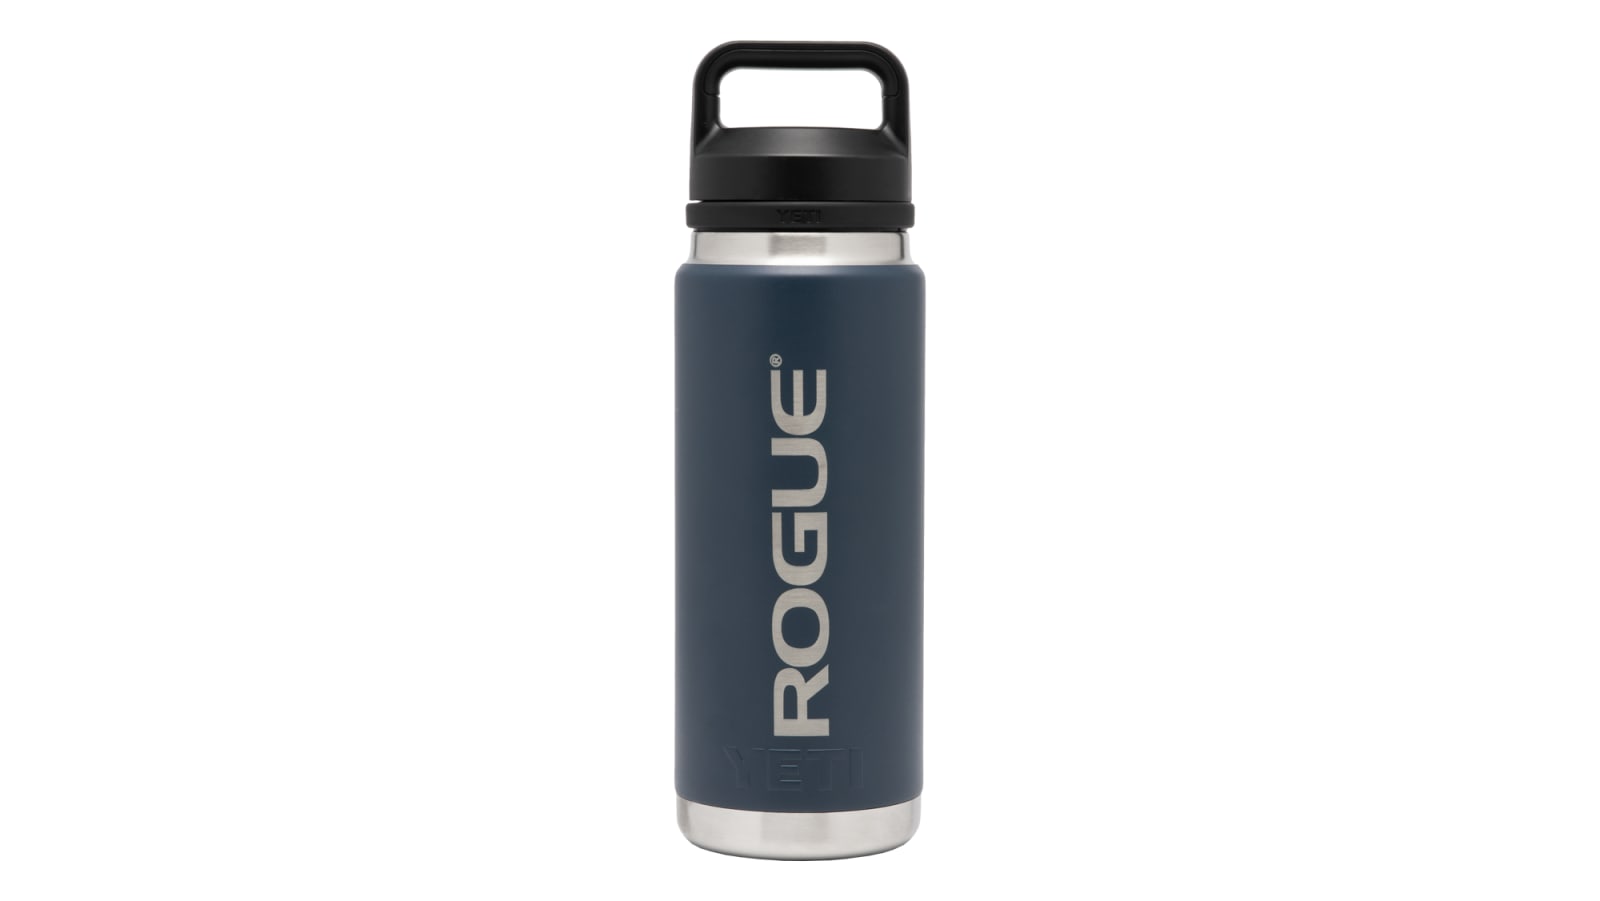 https://assets.roguefitness.com/f_auto,q_auto,c_limit,w_1600,b_rgb:ffffff/catalog/Gear%20and%20Accessories/Accessories/Shakers%20and%20Bottles/YT0055/YT0055-H_sdezyd.png